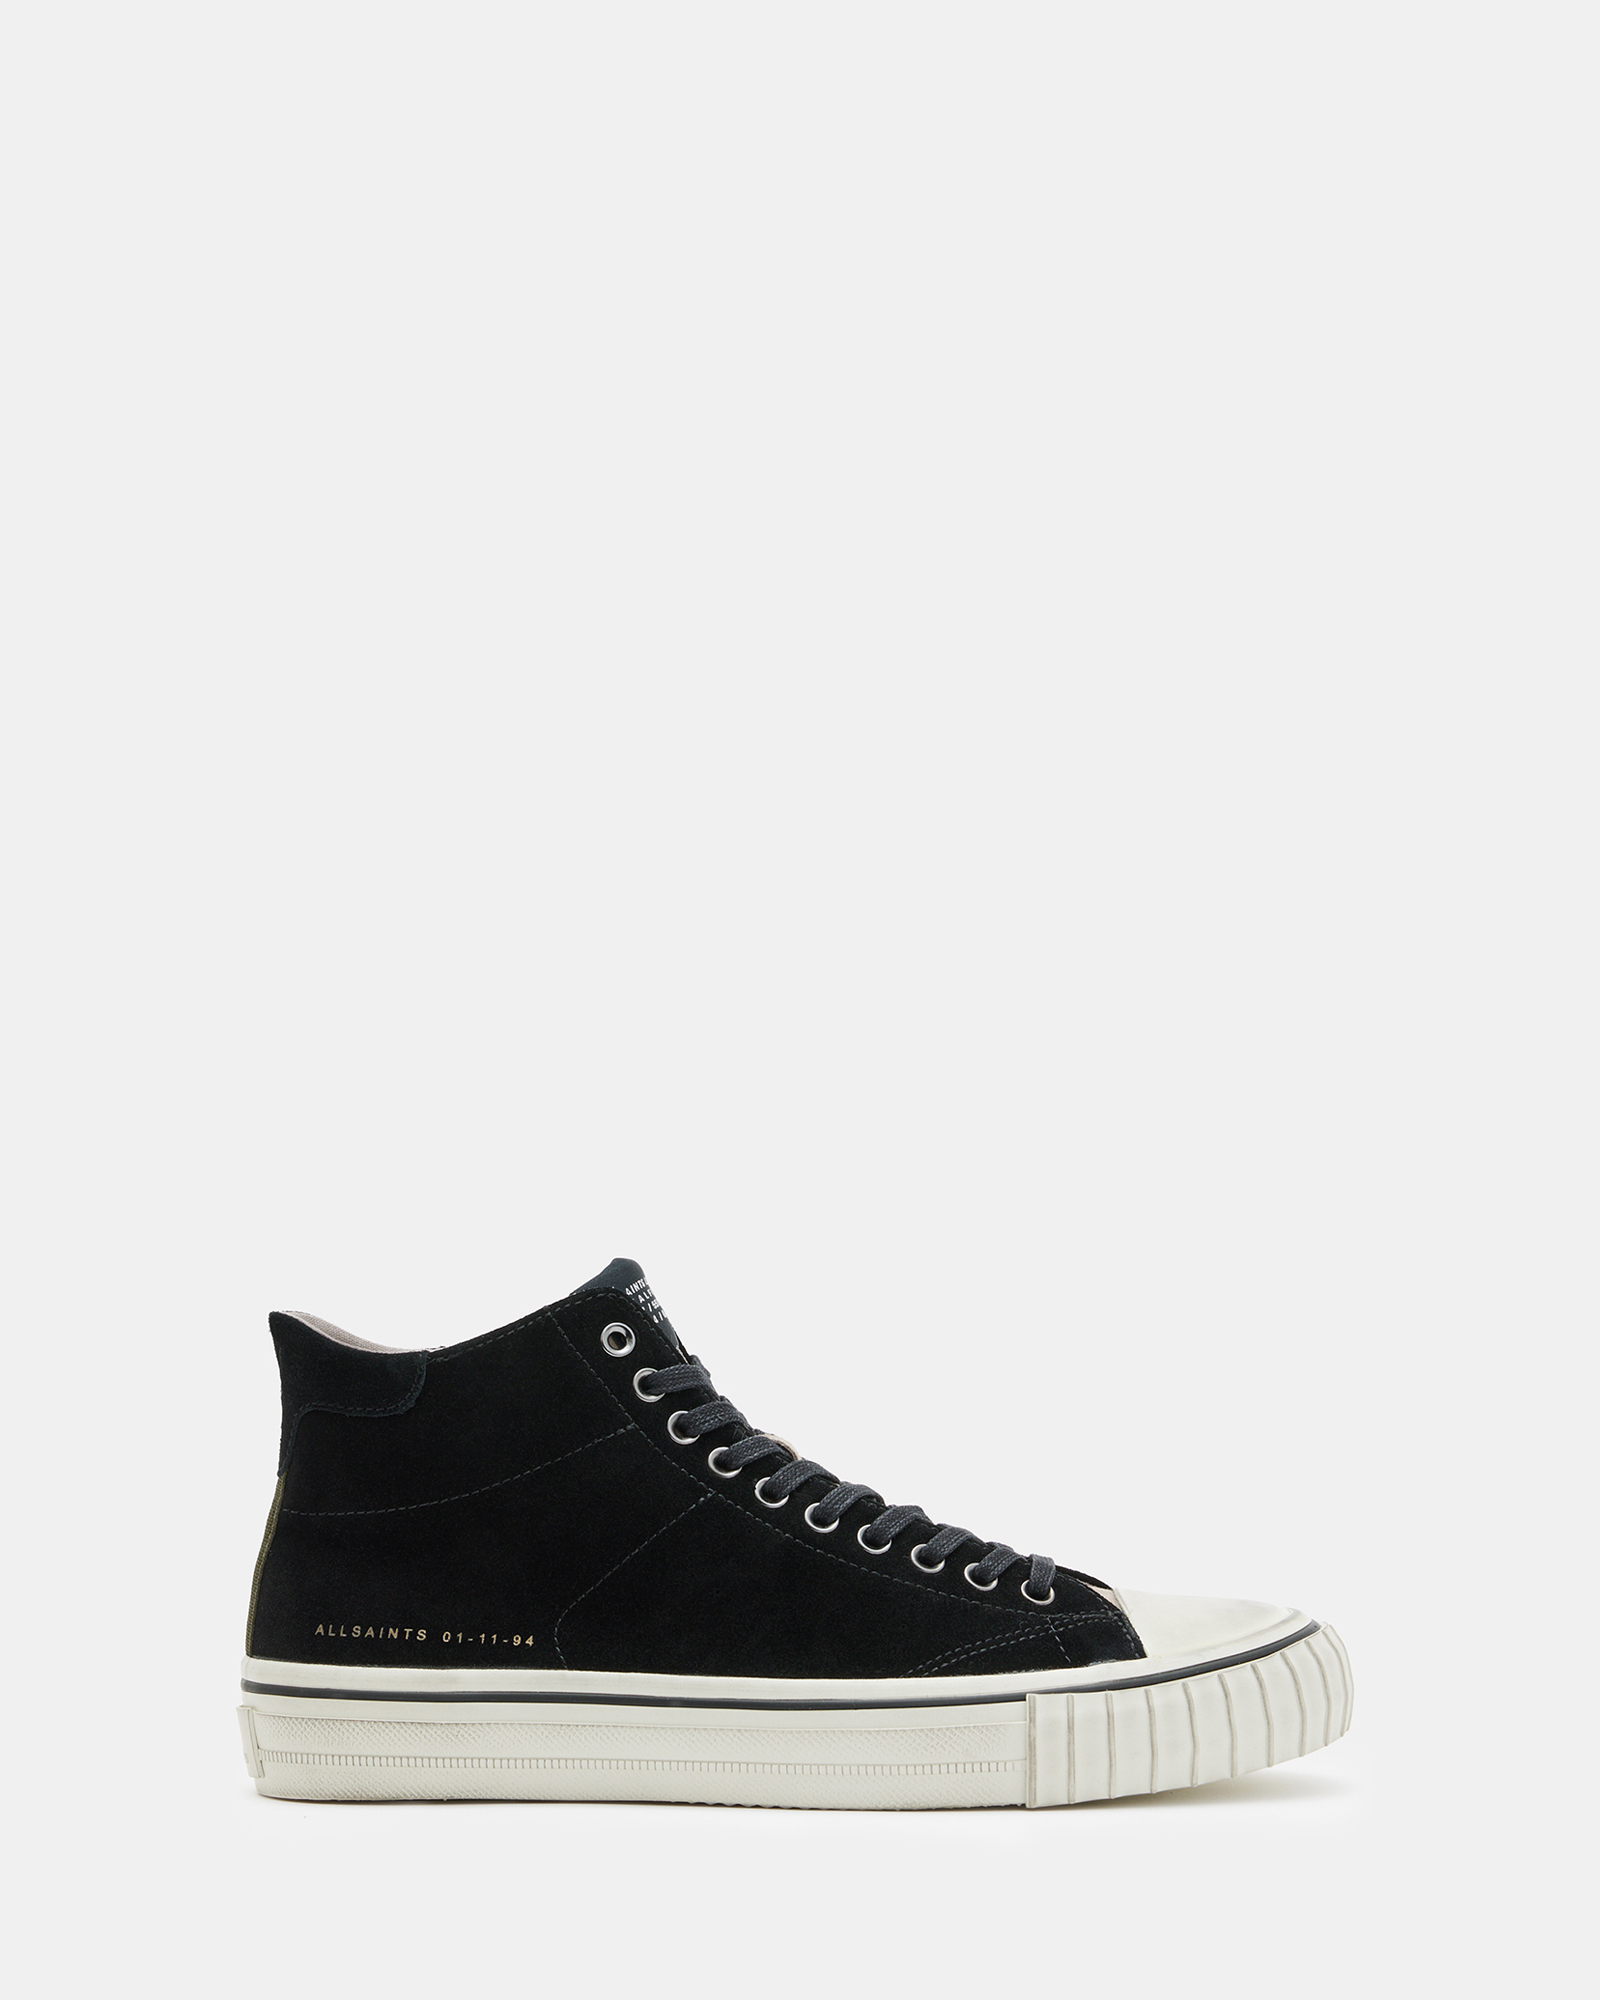 AllSaints Lewis Lace Up Leather High Top Sneakers